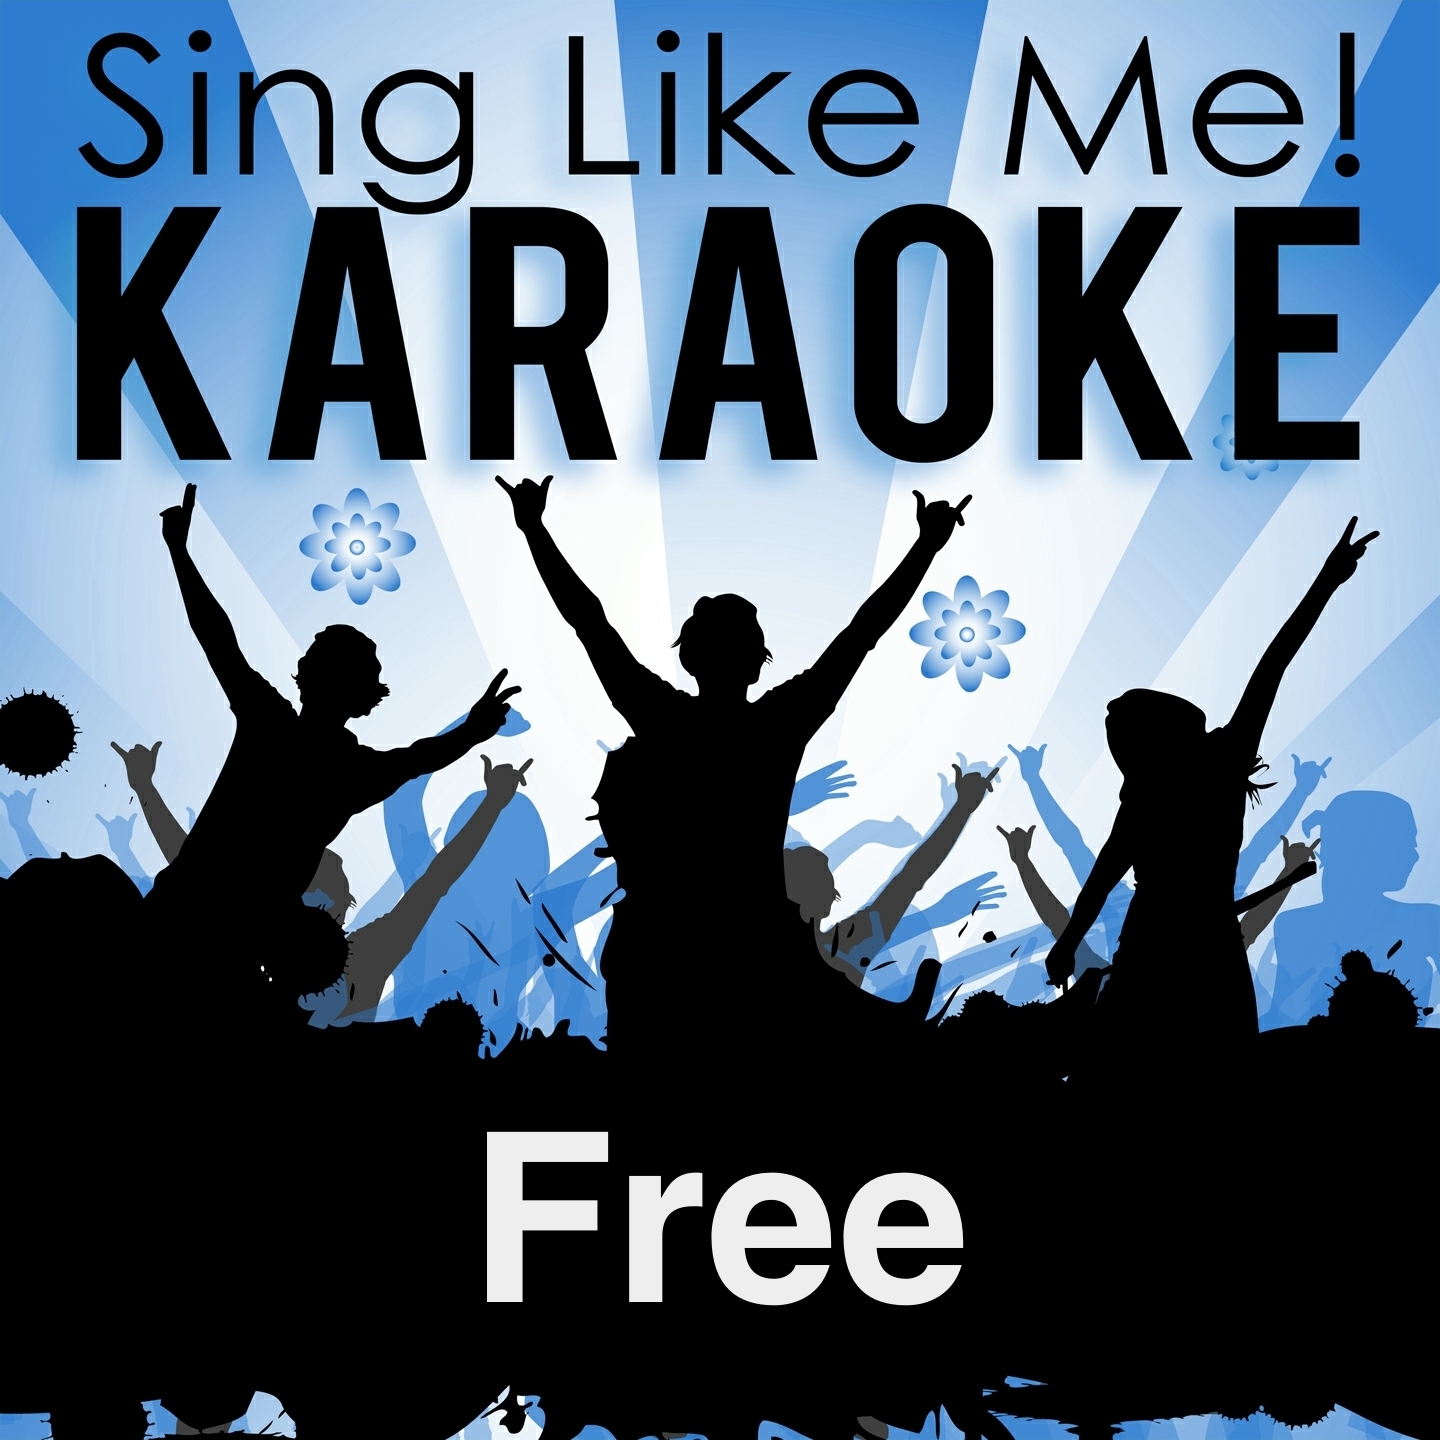 Free (Karaoke Version with Guide Melody) (Originally Performed By Lighthouse Family)